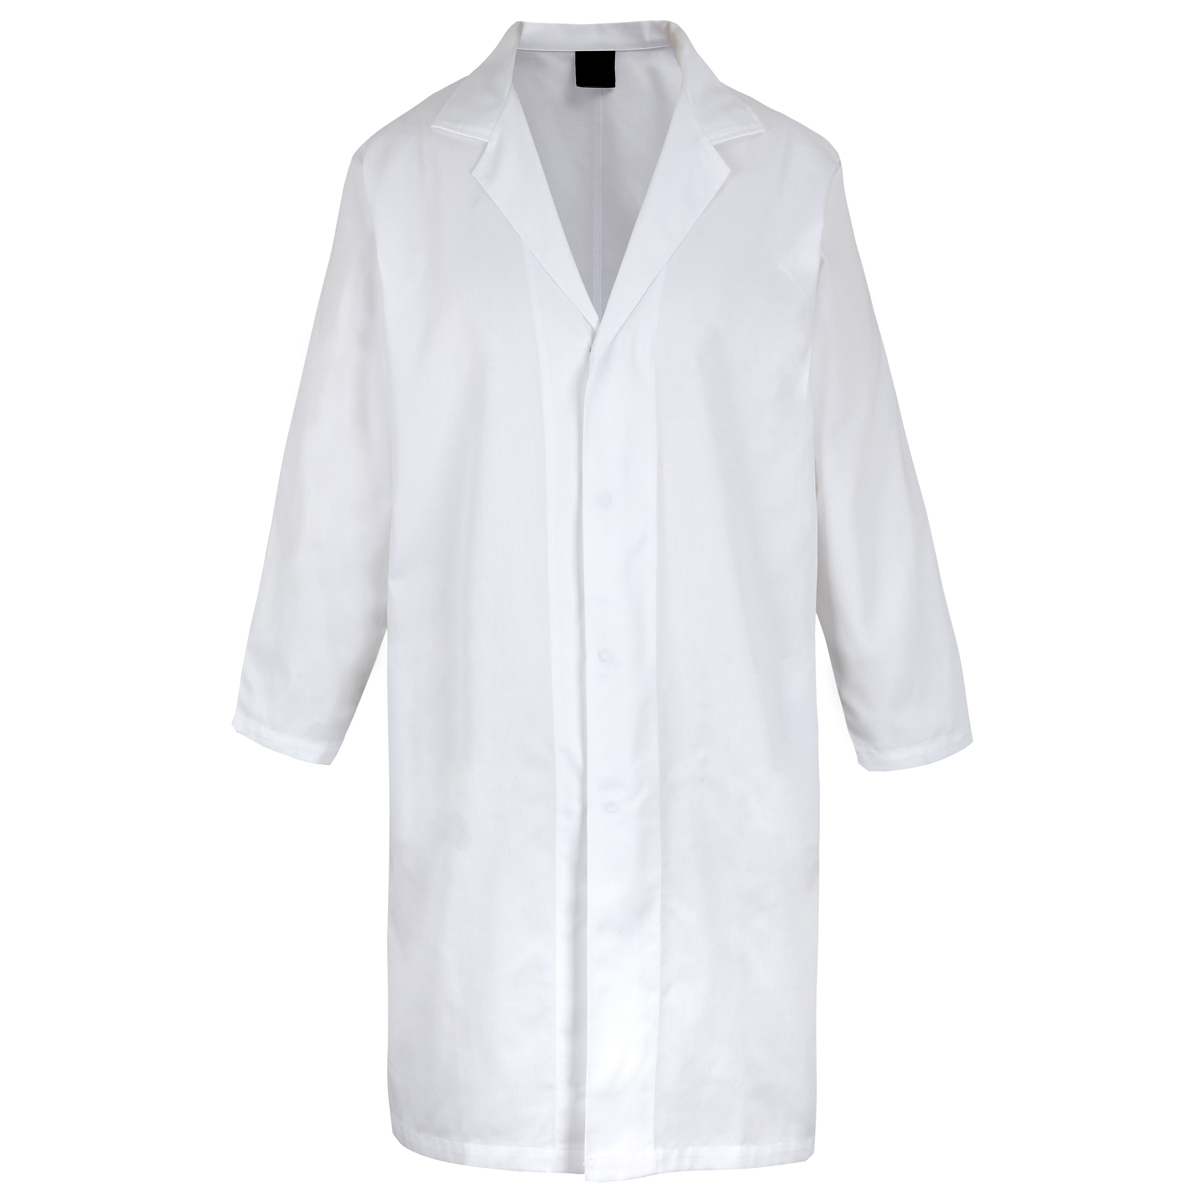 Dust/Lab Coat Without Pockets - White